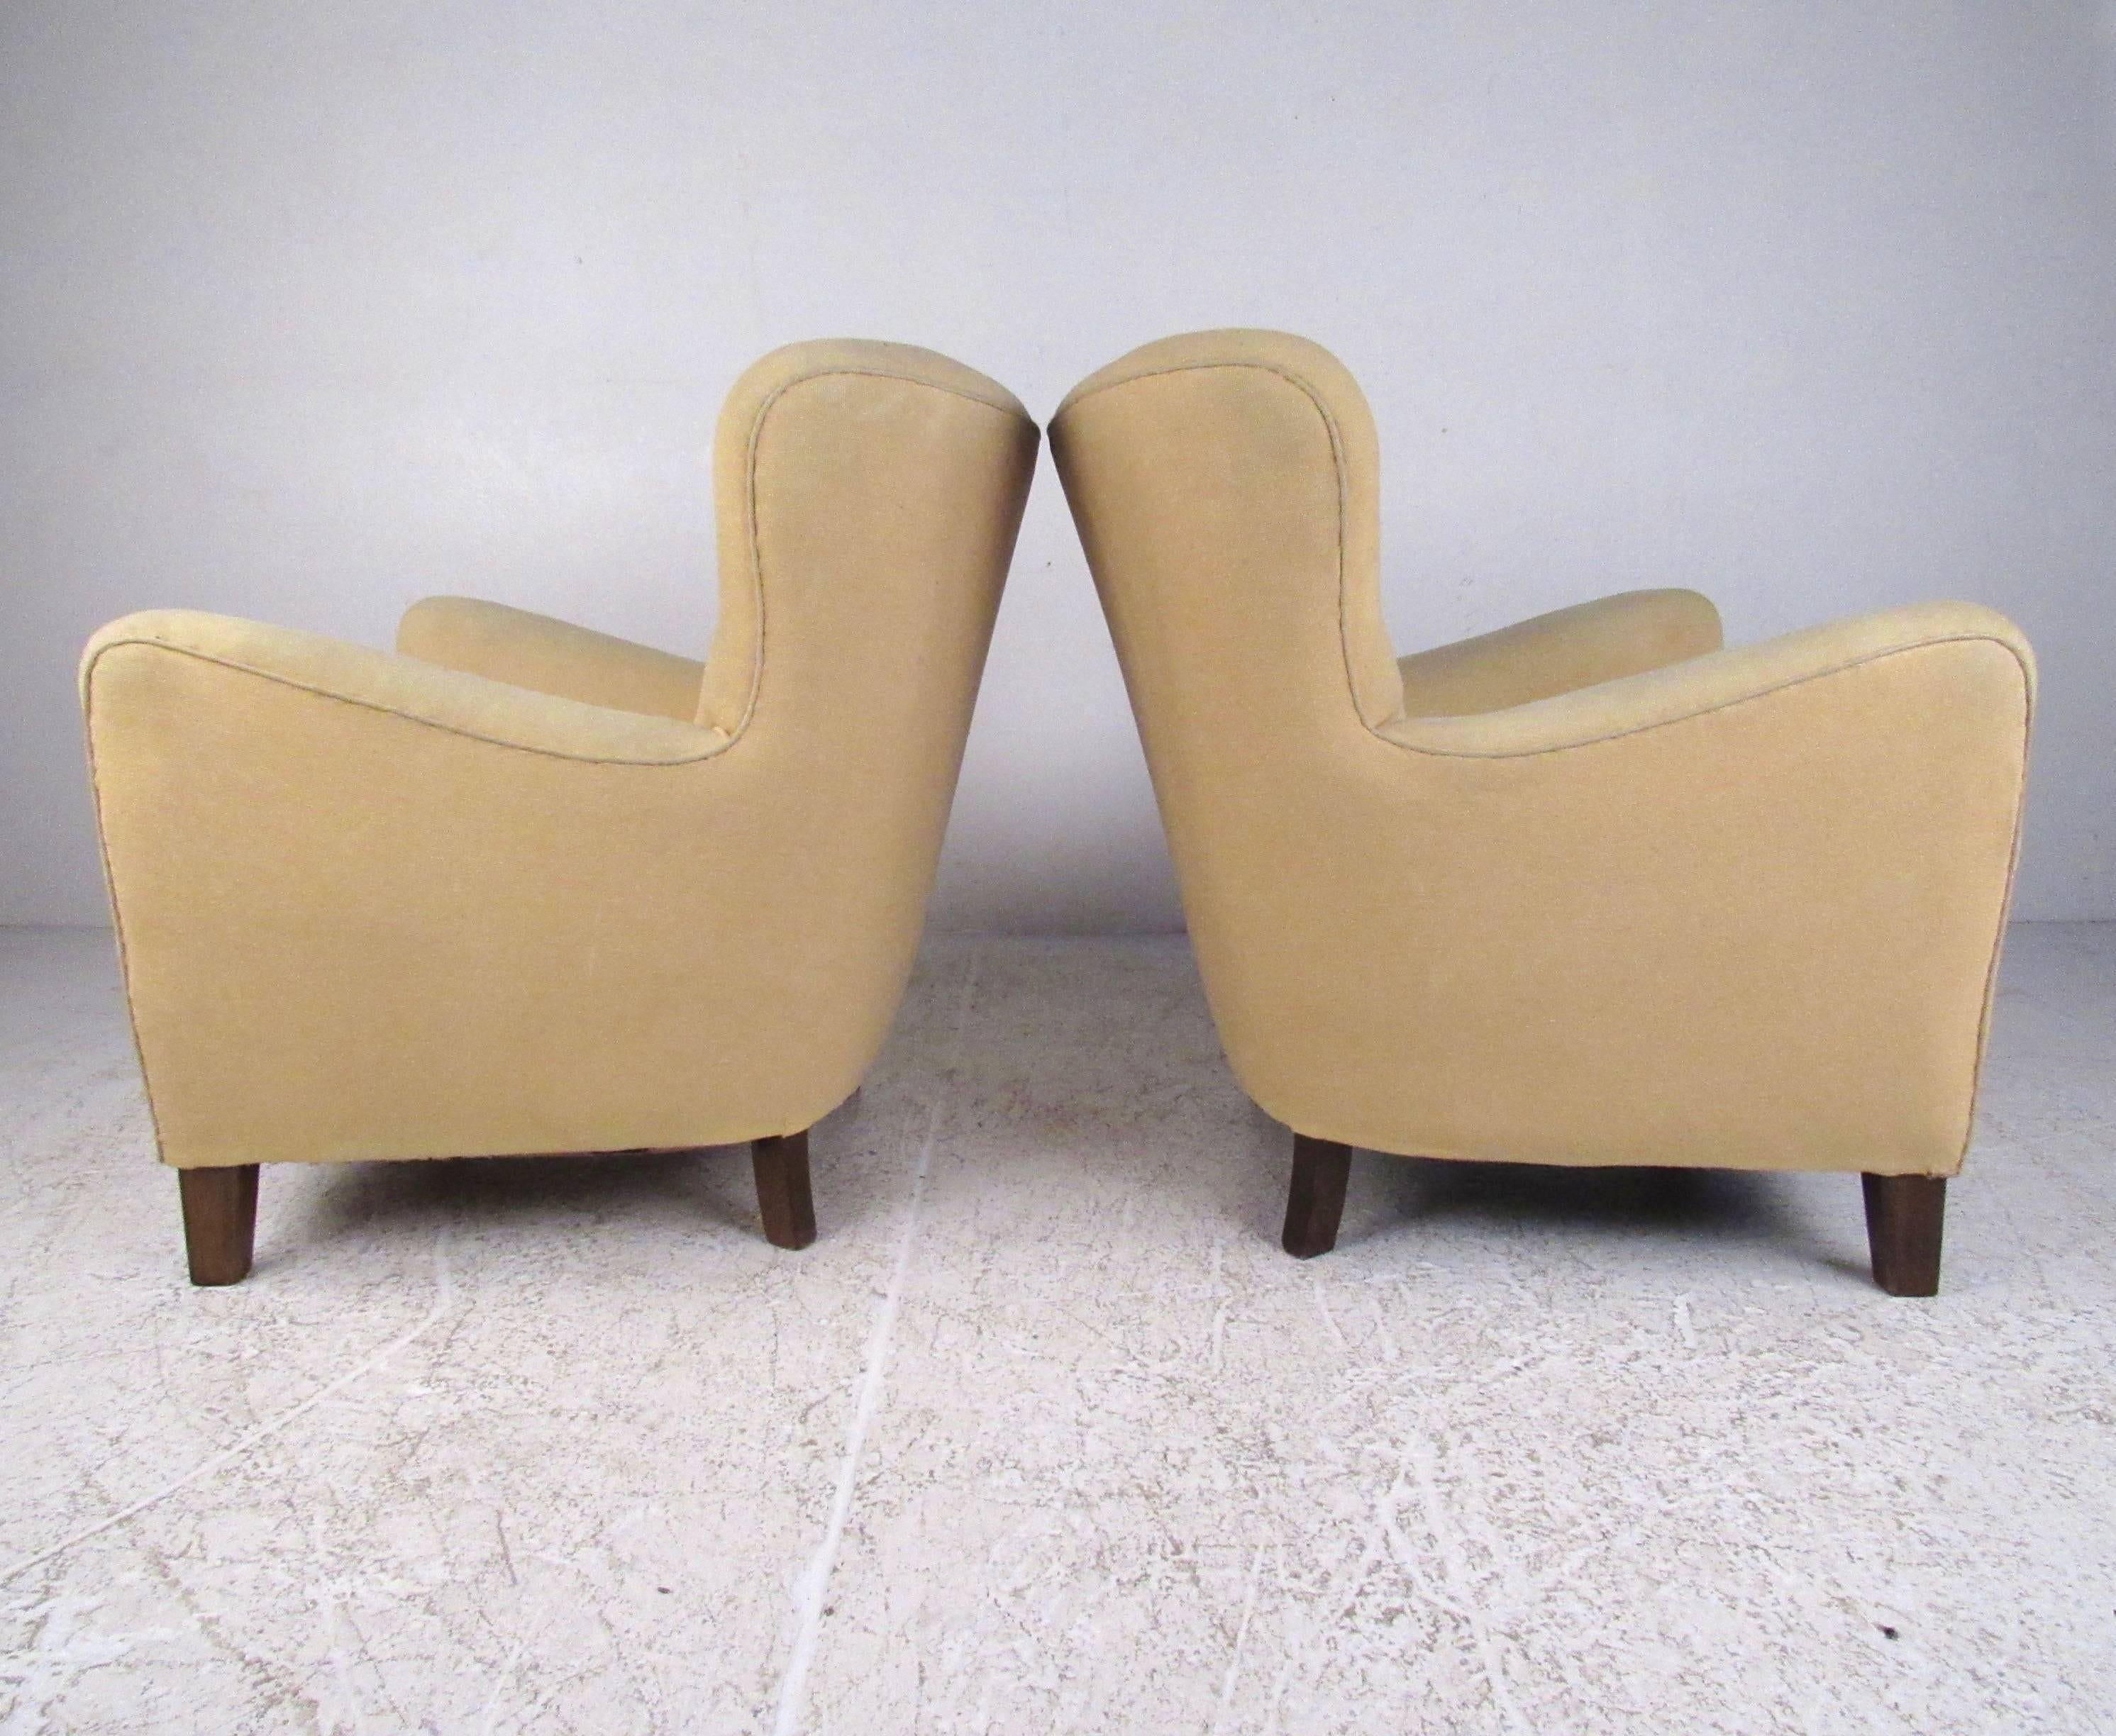 Mid-20th Century Pair of Art Deco Style Lounge Chairs